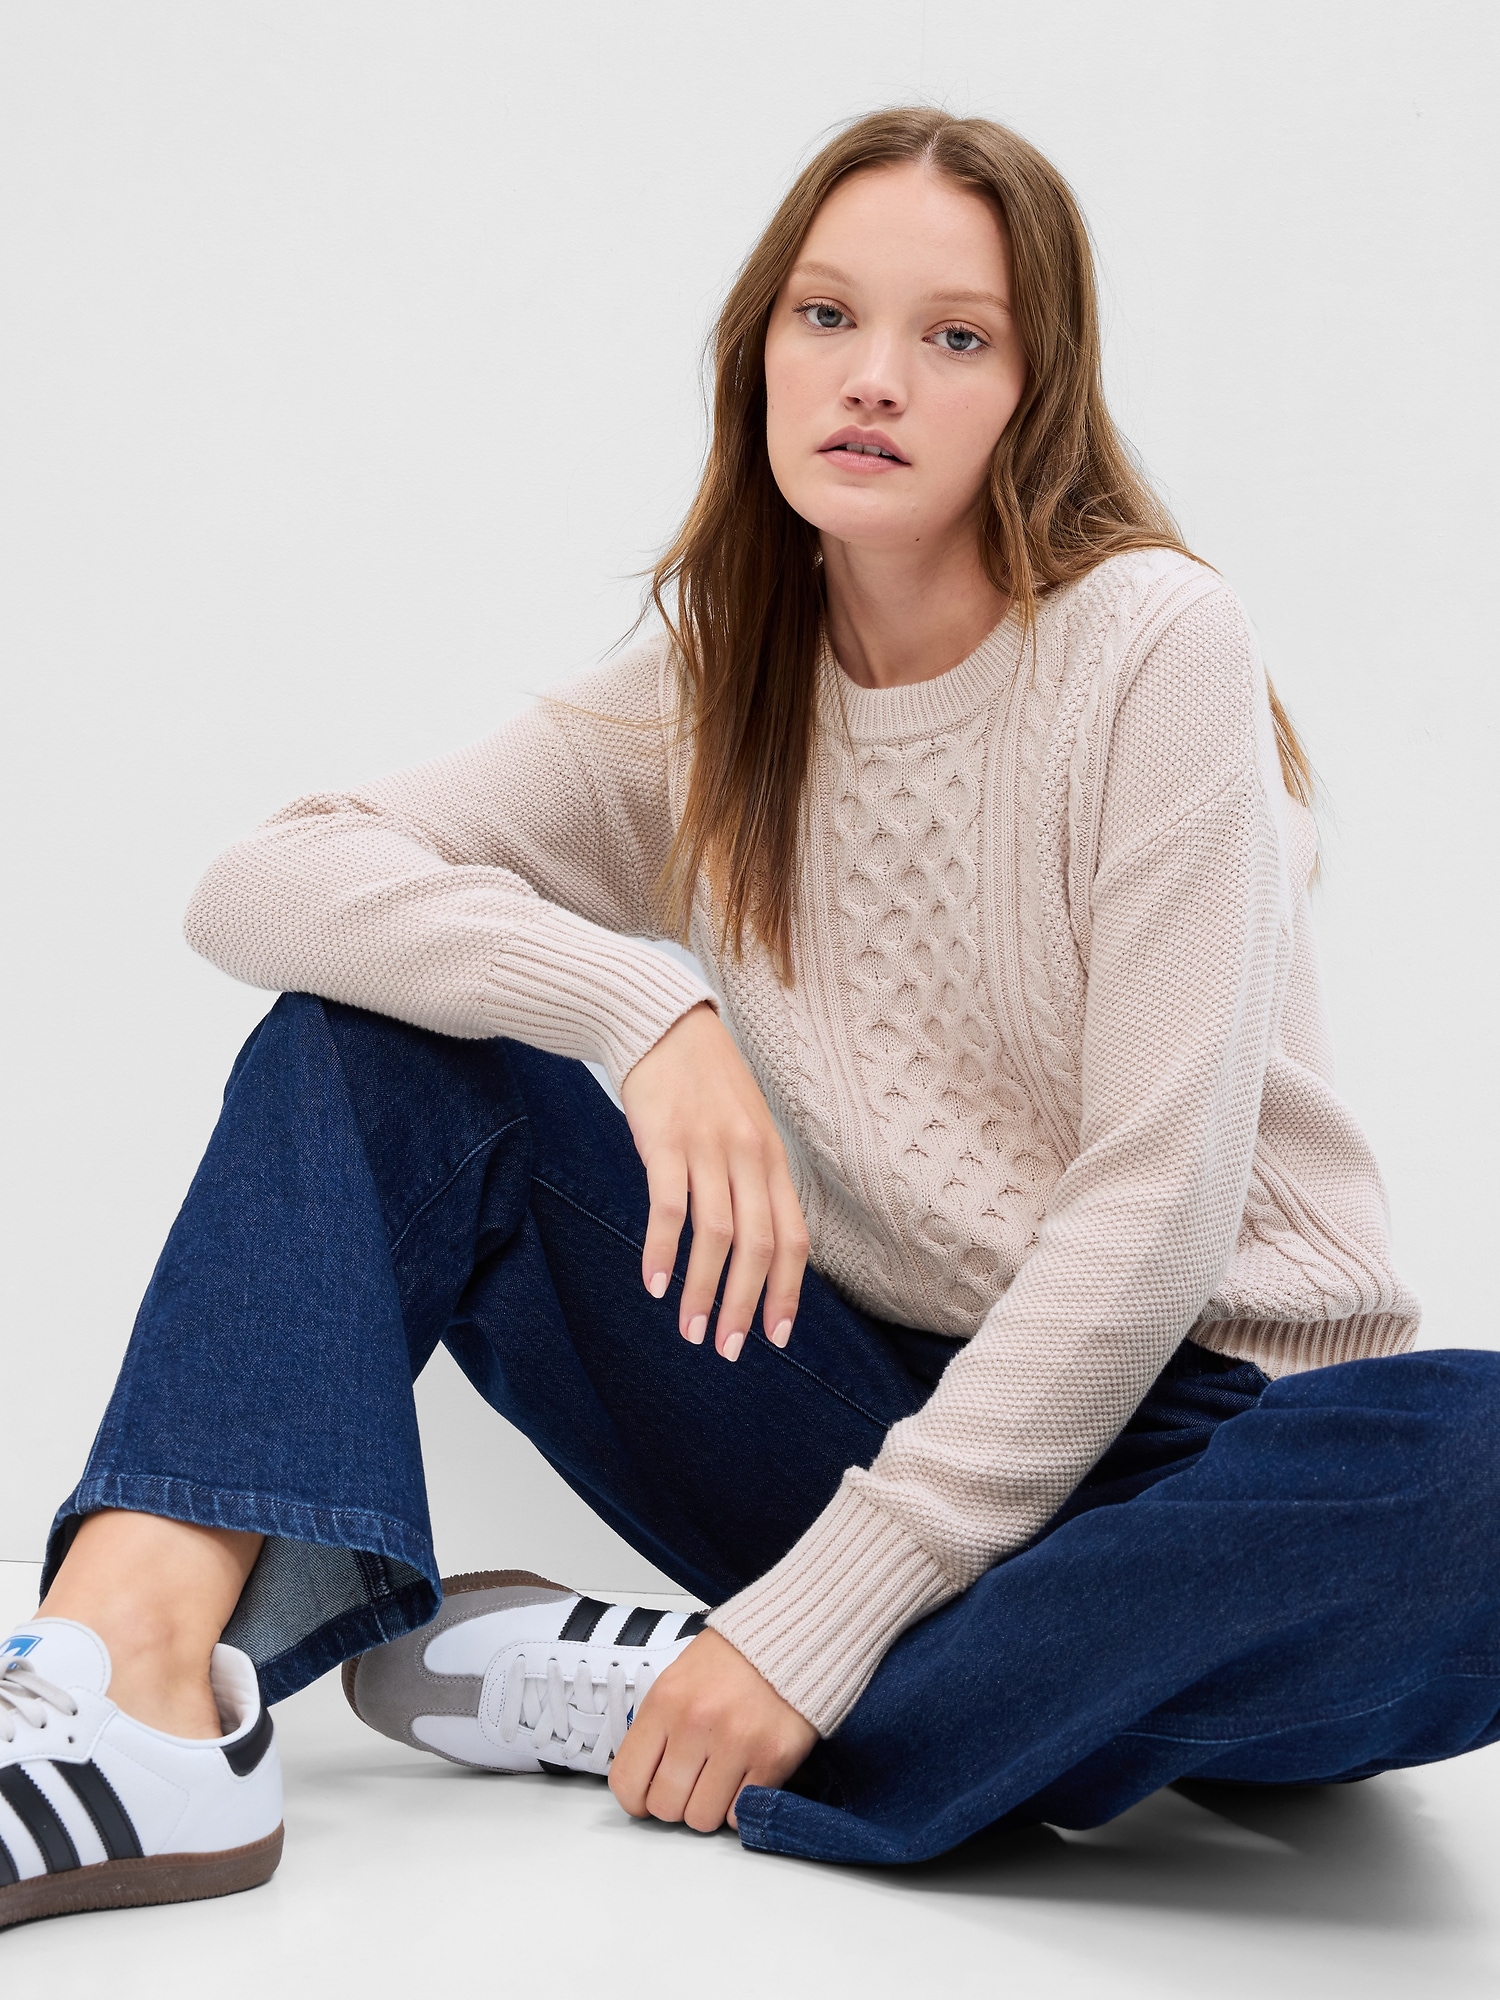 Cable-Knit Crewneck Sweater